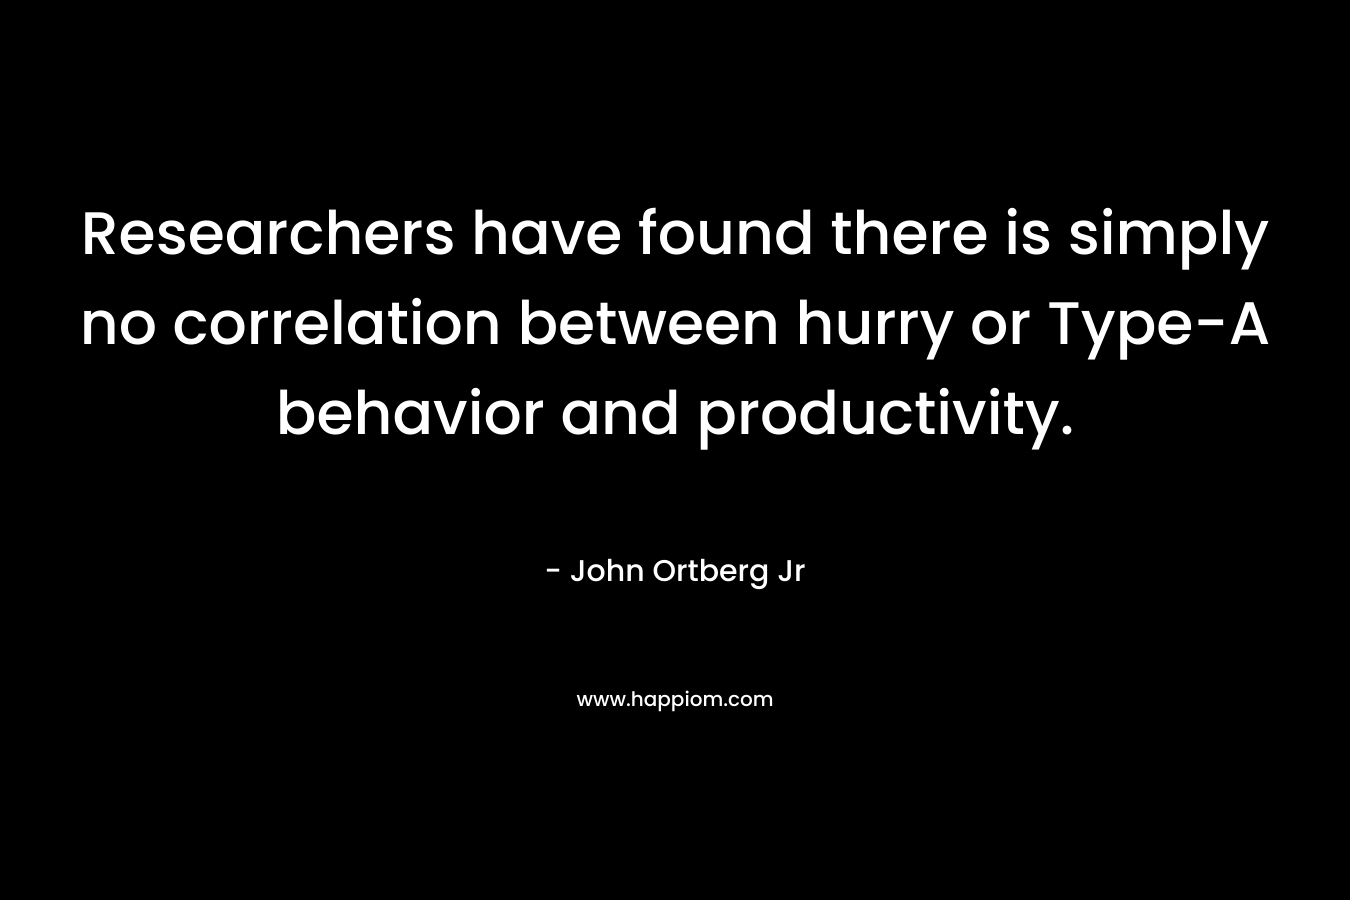 Researchers have found there is simply no correlation between hurry or Type-A behavior and productivity.